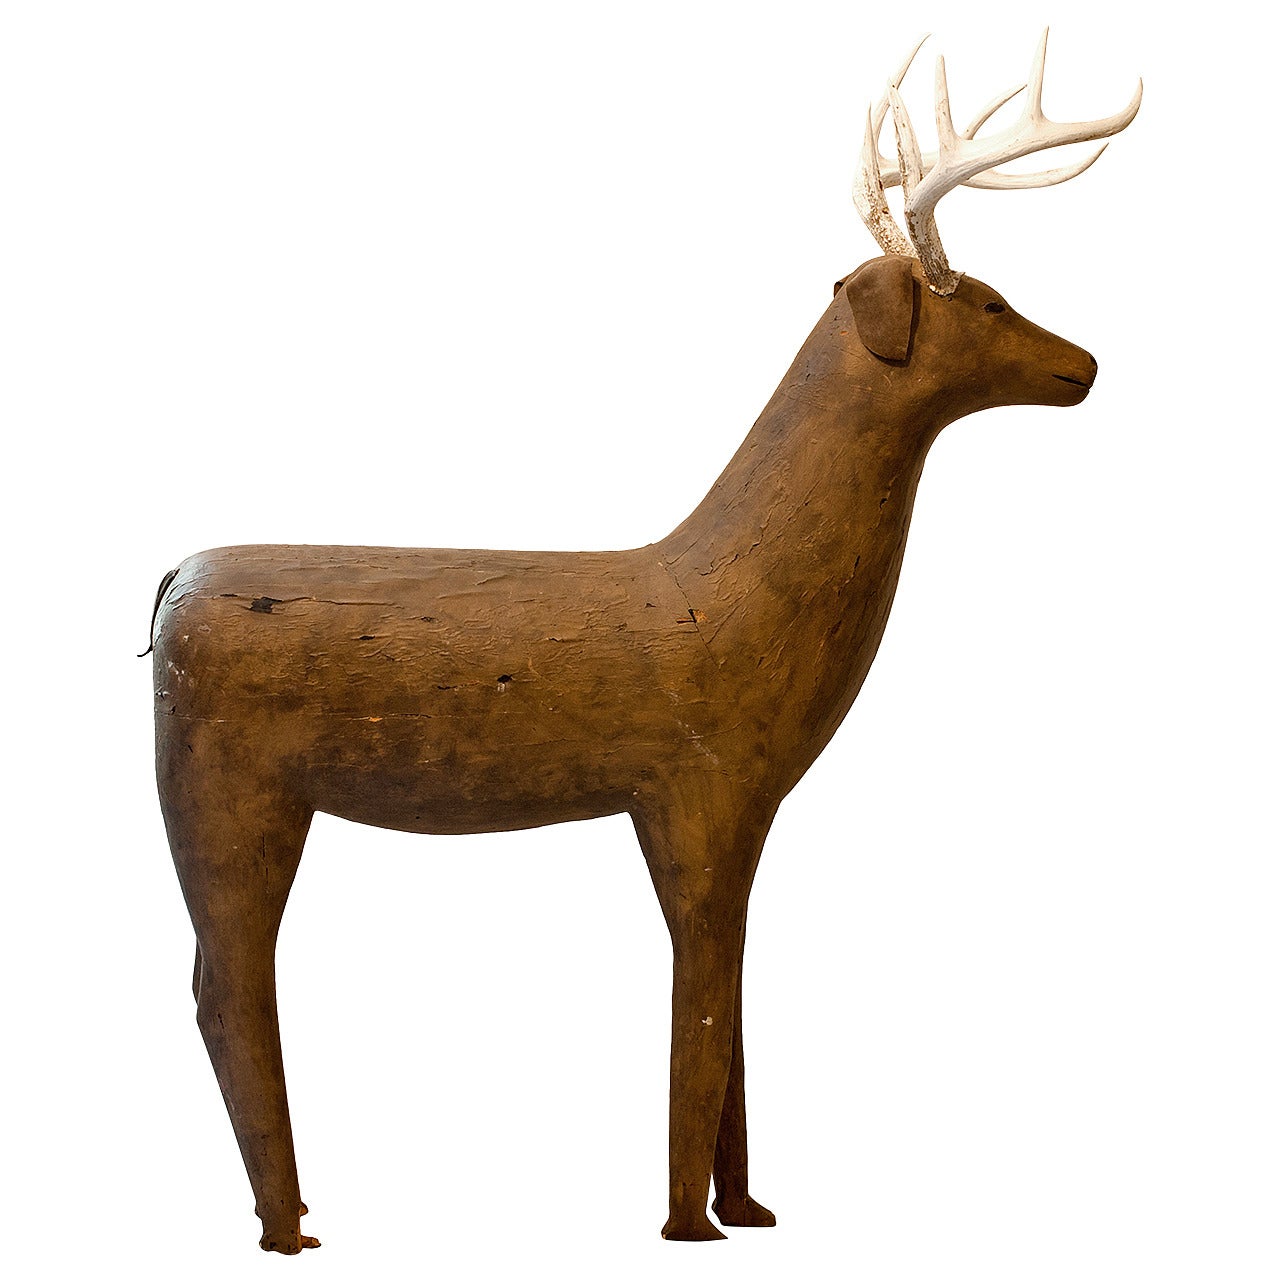 Carved and Painted Primitive Deer For Sale